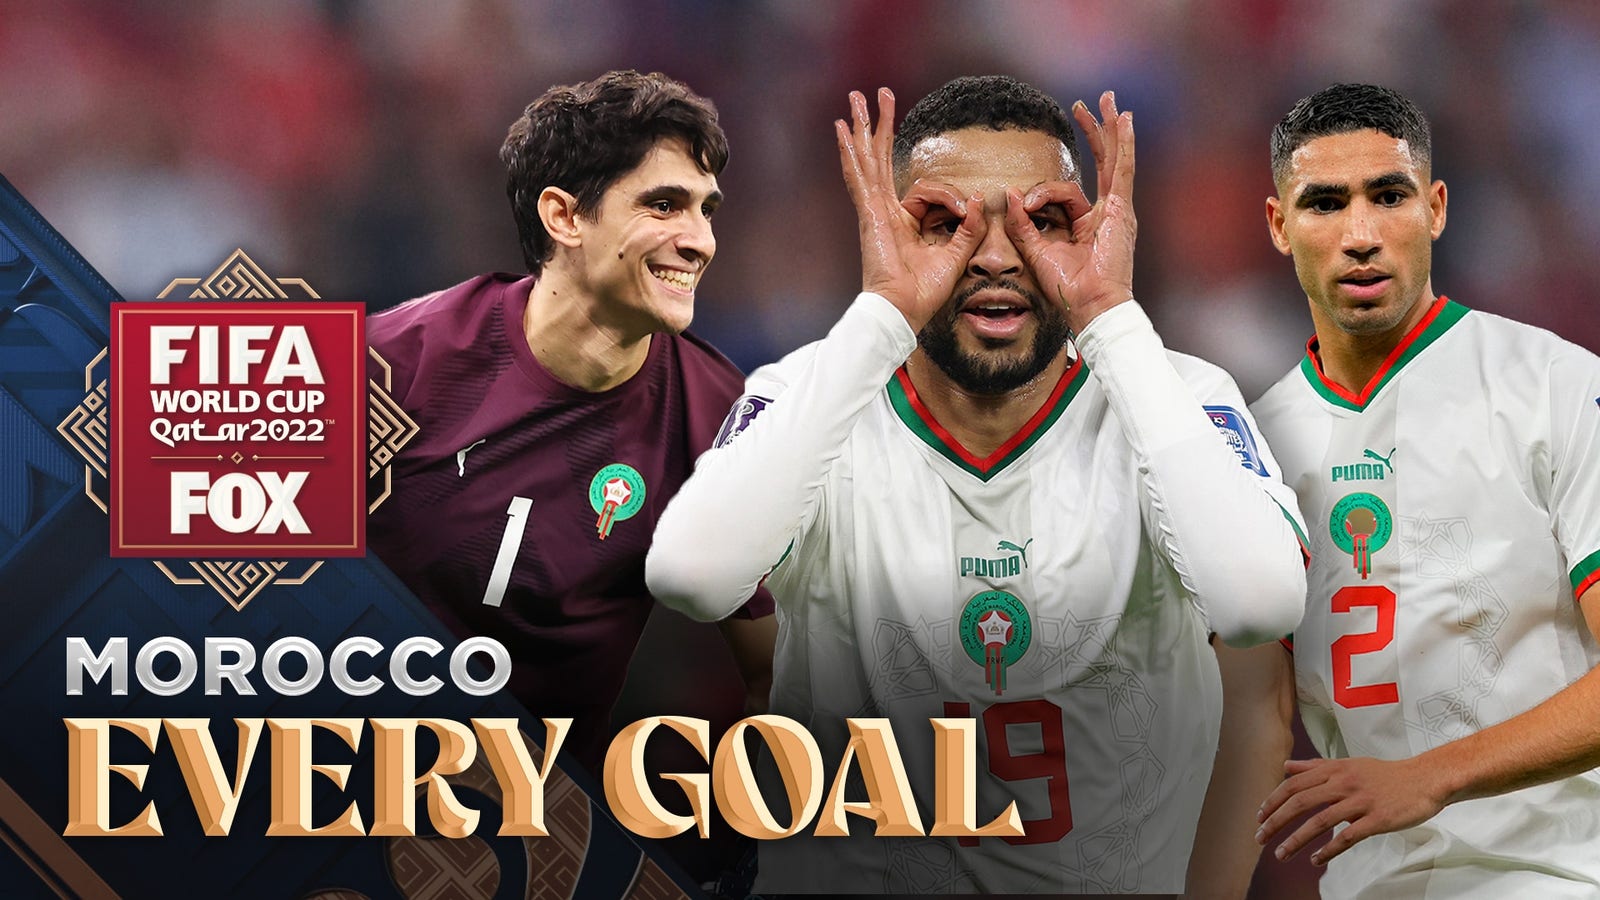 Every goal scored by Morocco at the FIFA Men's World Cup 2022